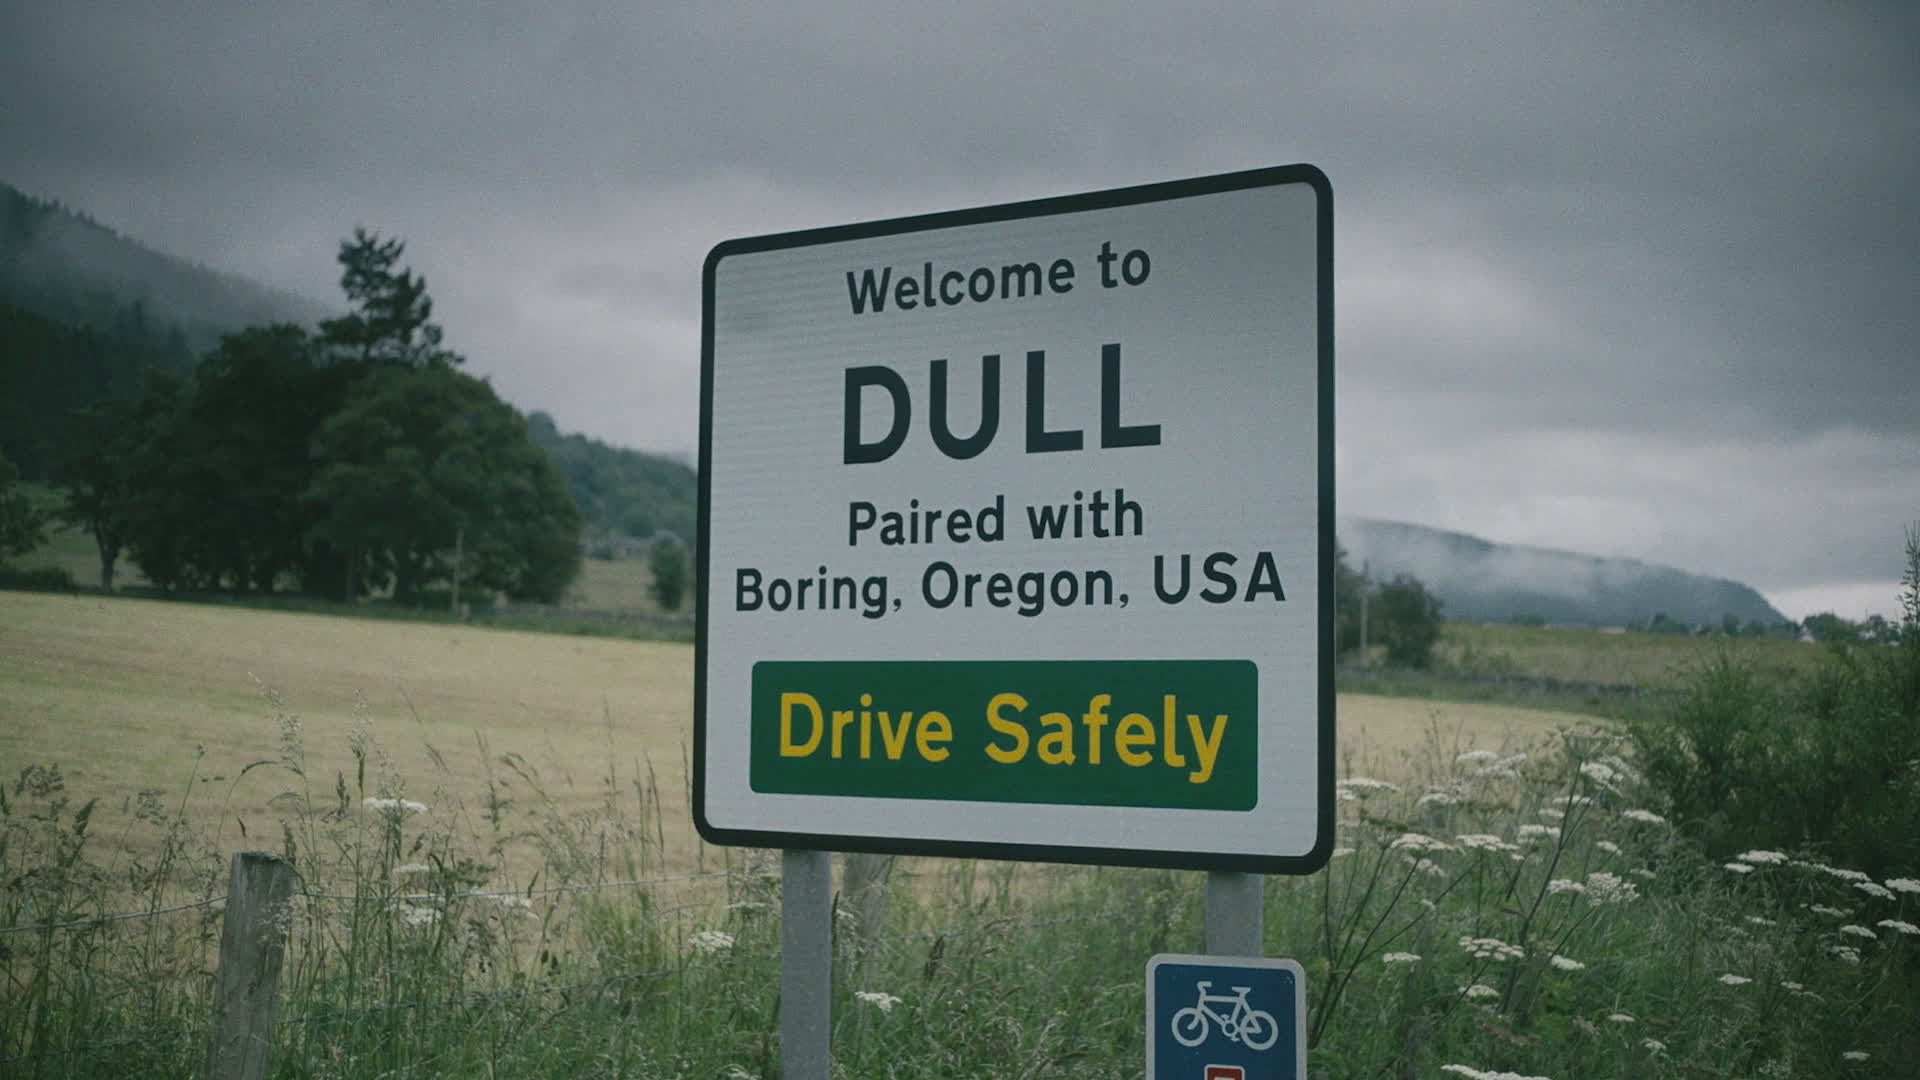 Dull and Boring